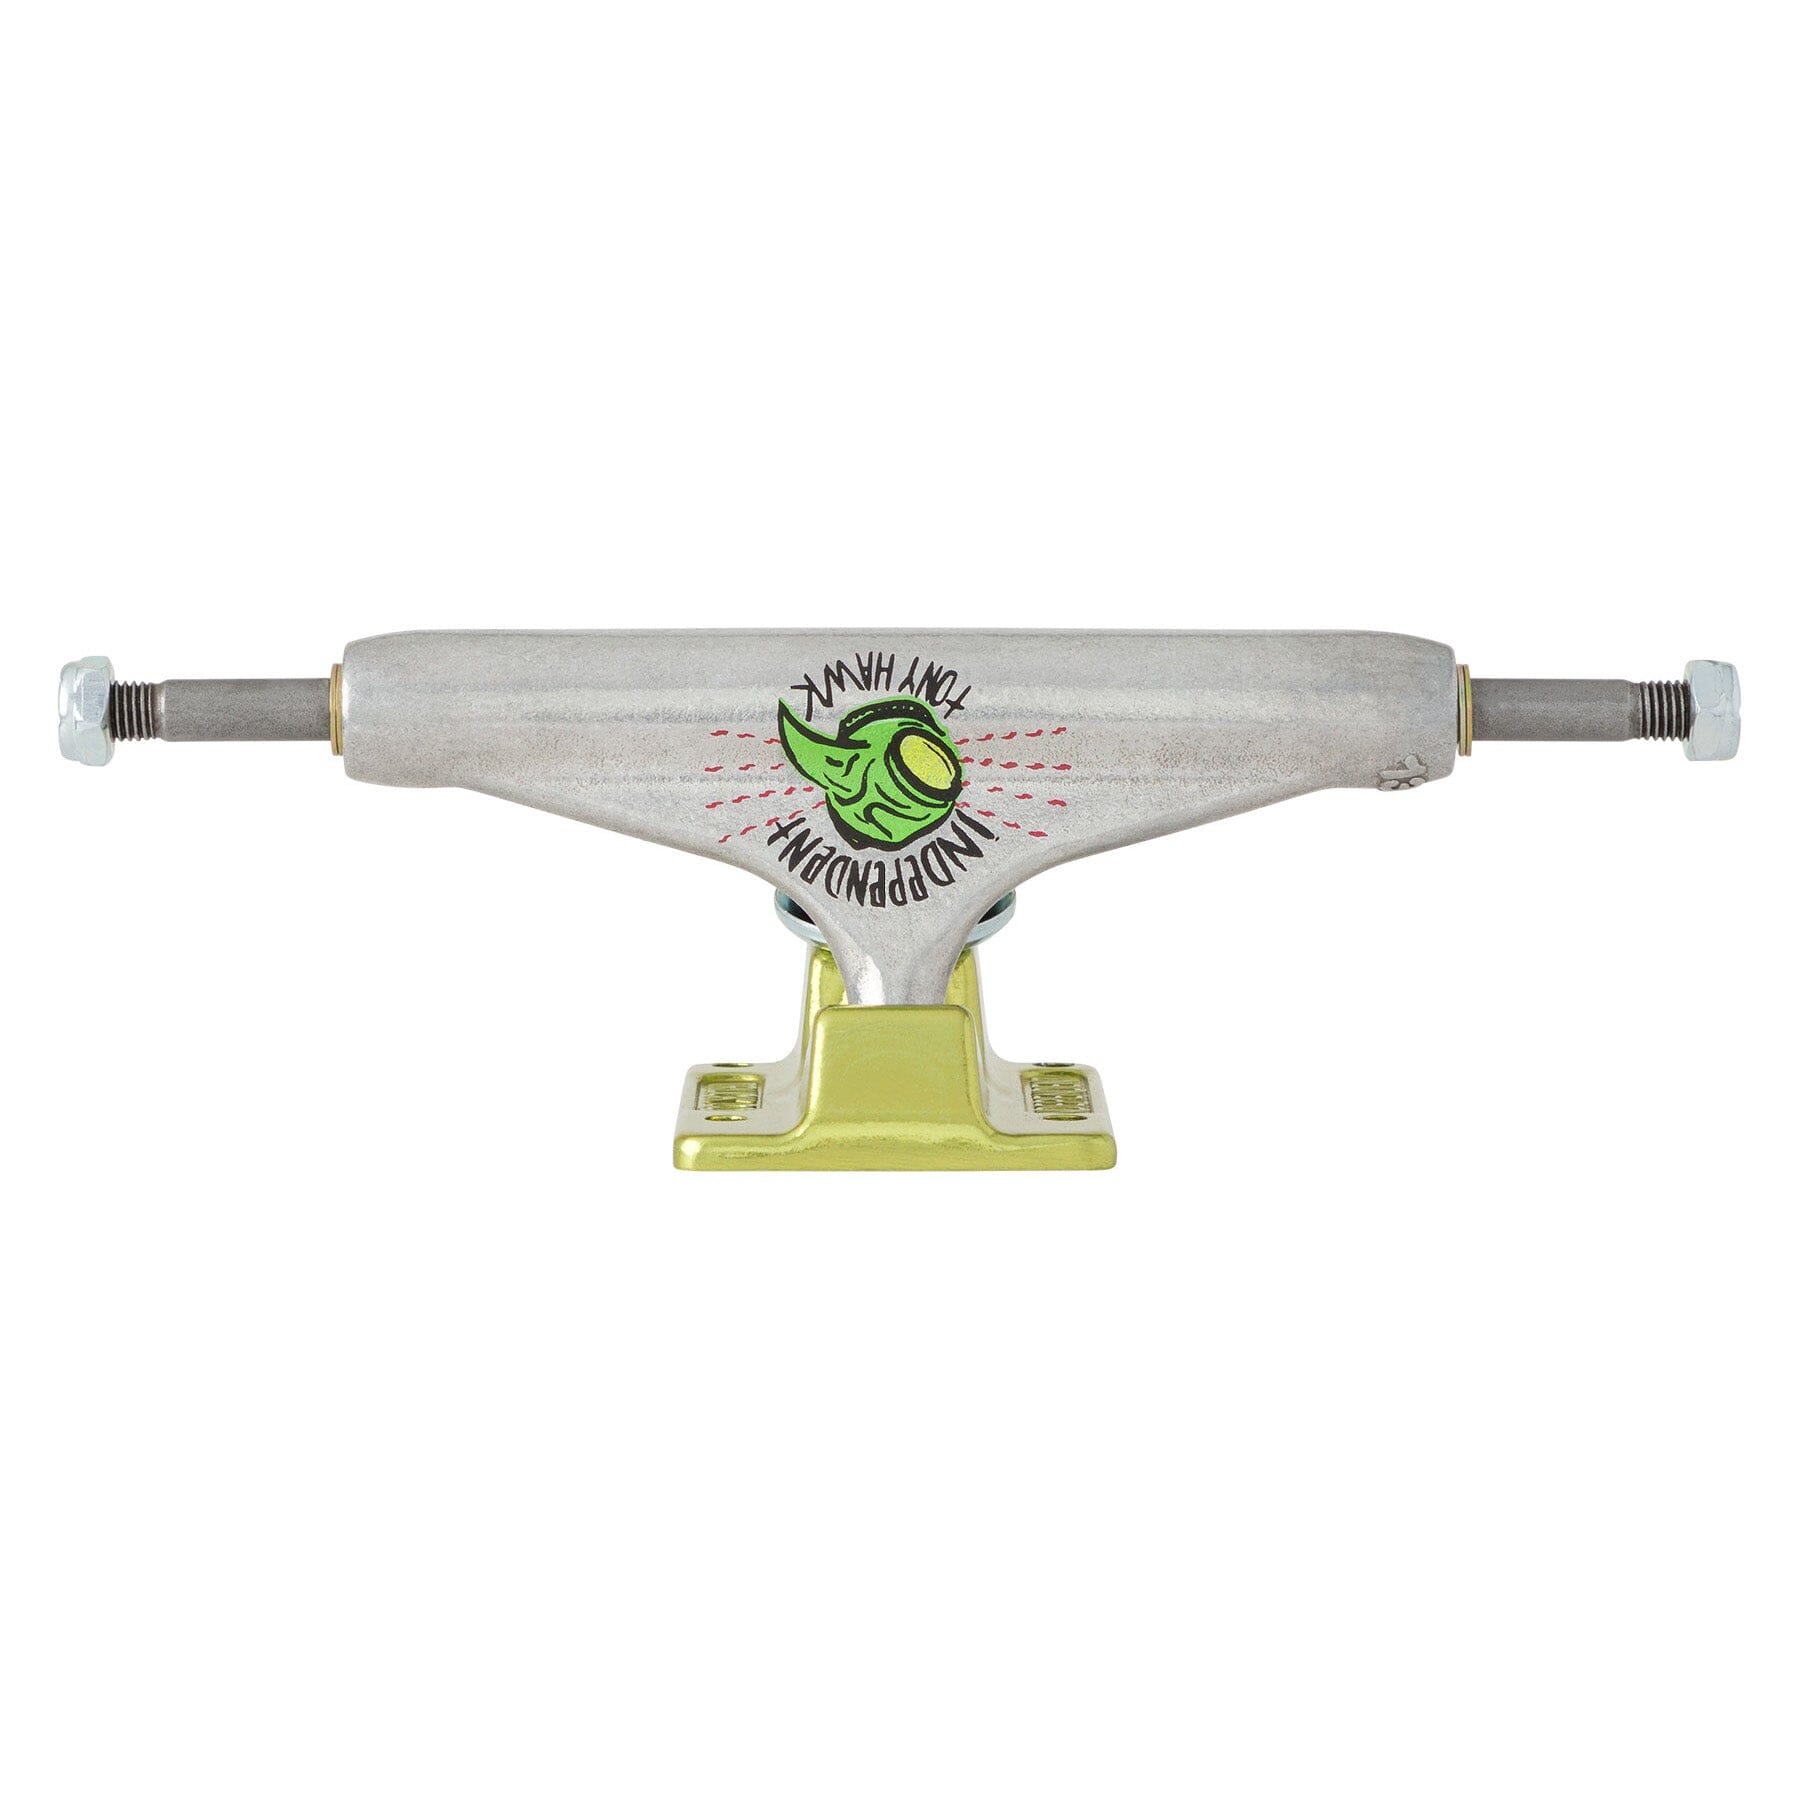 Independent Stage 11 Hawk Transmission Forged Hollow Trucks (Assorted Sizes) trucks Independent 